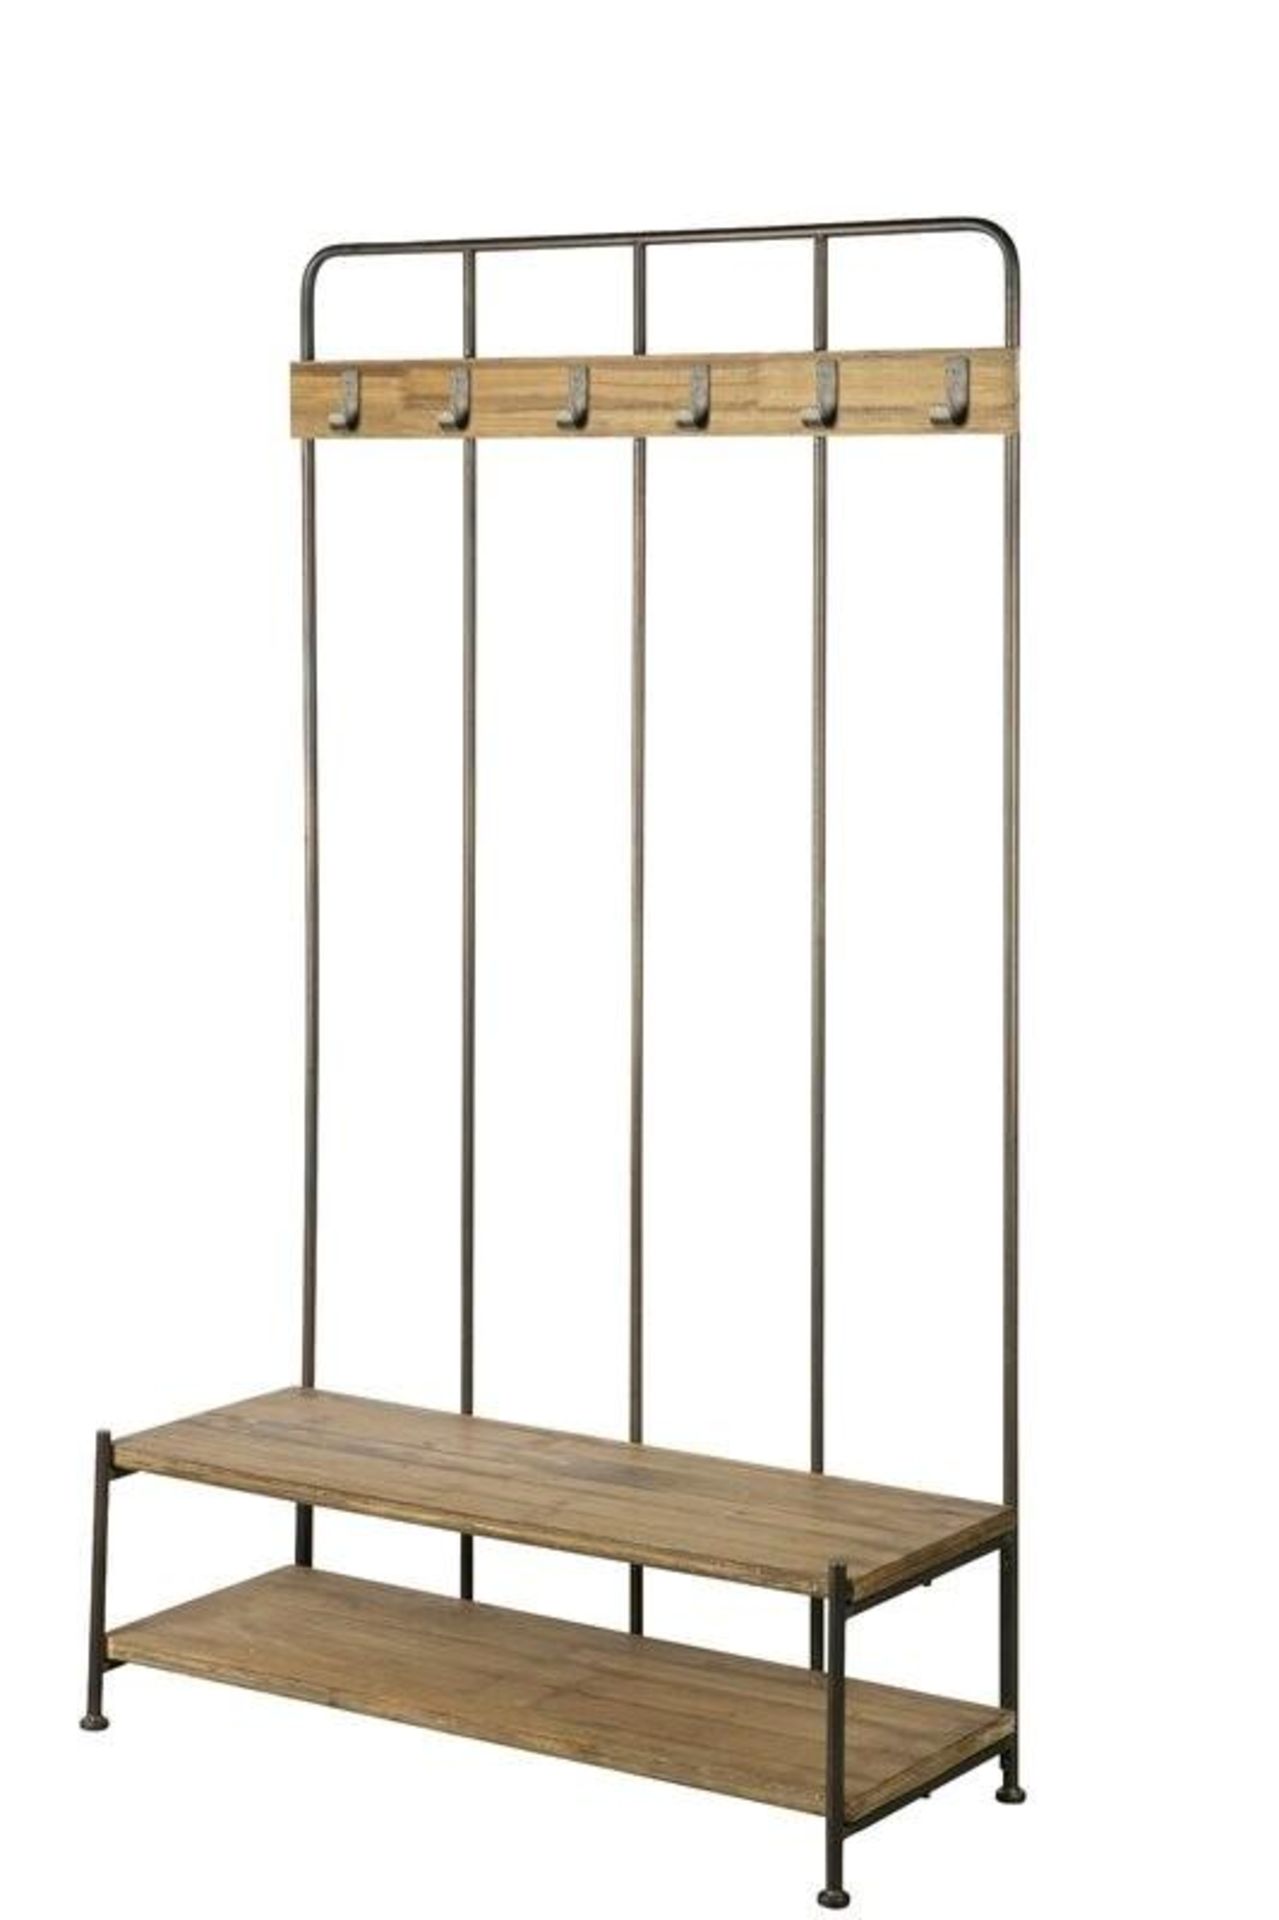 1 x GIRO Industrial-style Freestanding Coat Rack / Hallway Stand In Wood And Metal - Brand New Boxed - Image 4 of 5